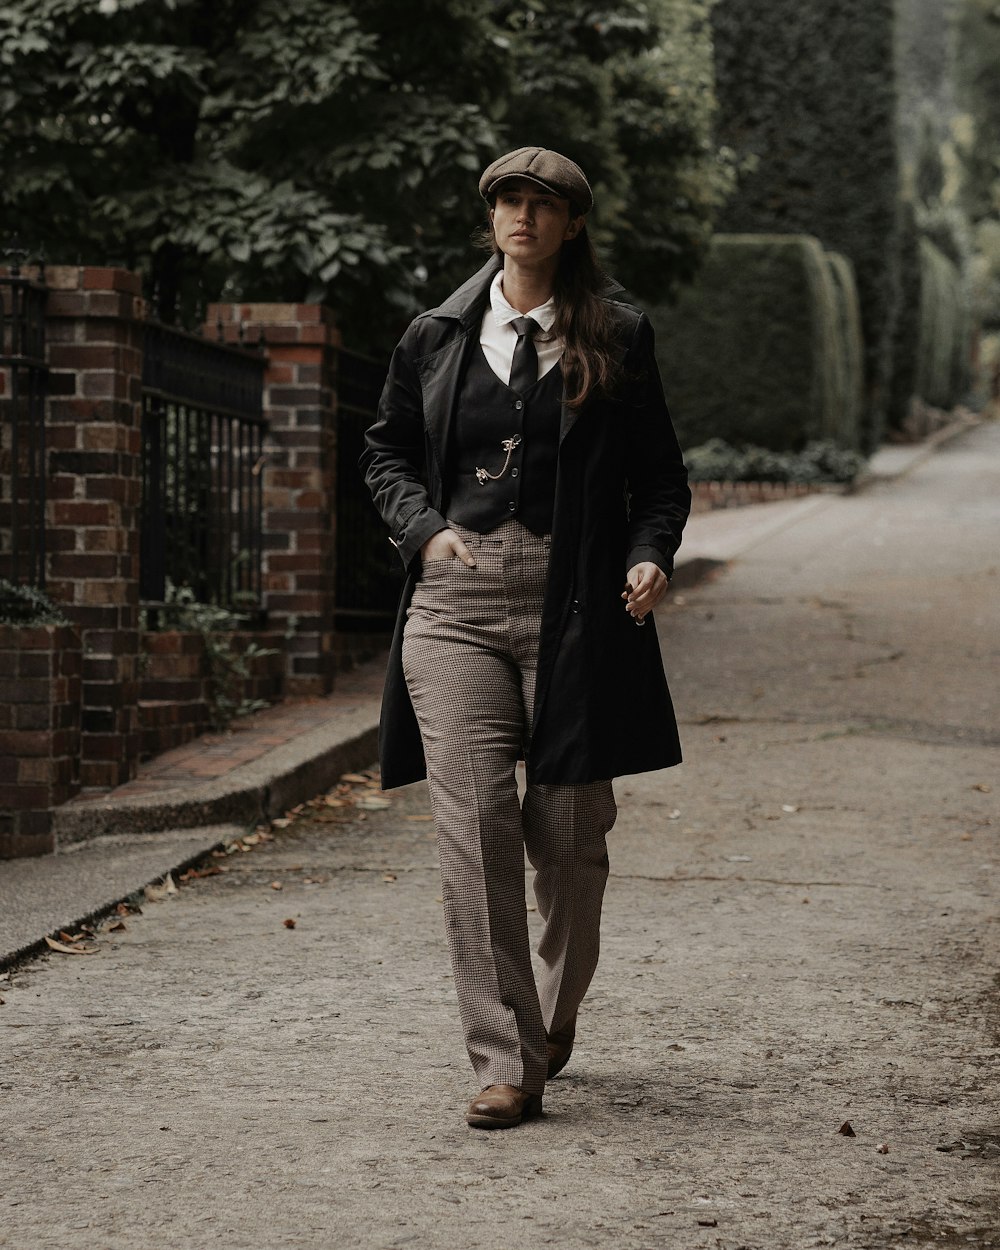 a woman in a suit and tie walking down a street